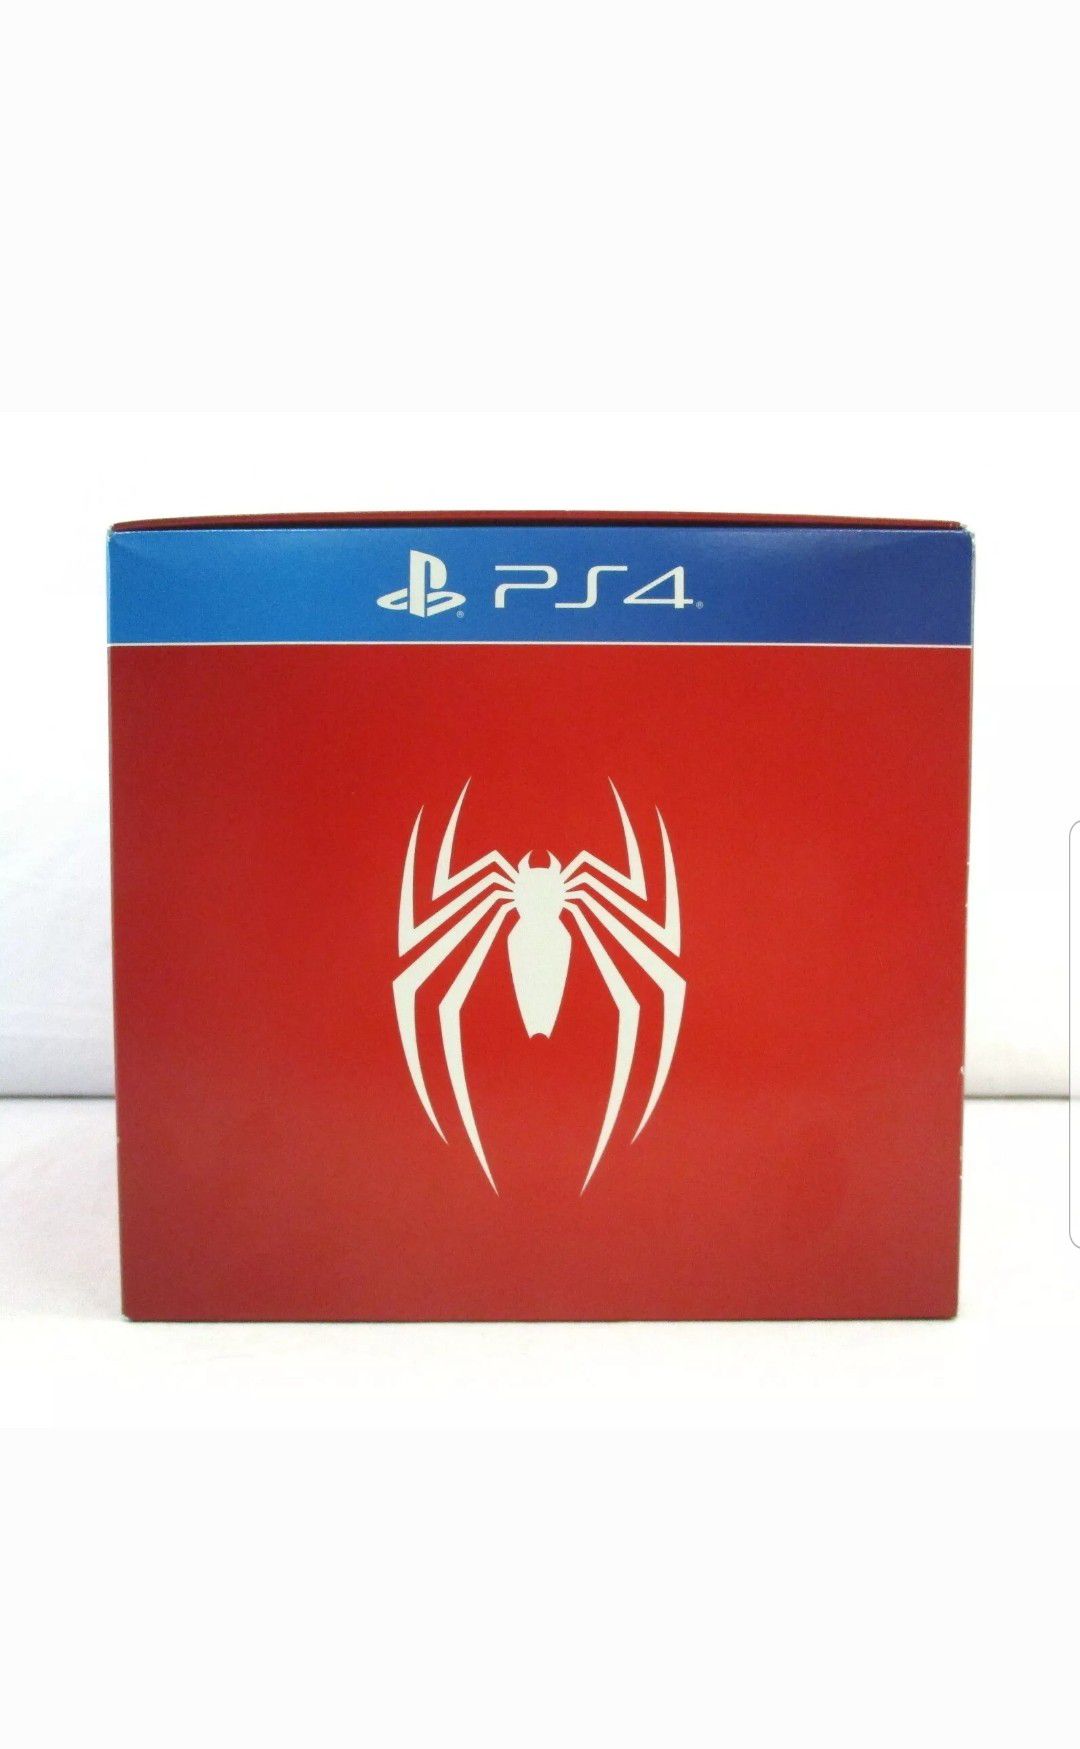 SPIDER-MAN Collector's Edition Sony PlayStation 4 Video Game PS4 NOT SYSTEMS